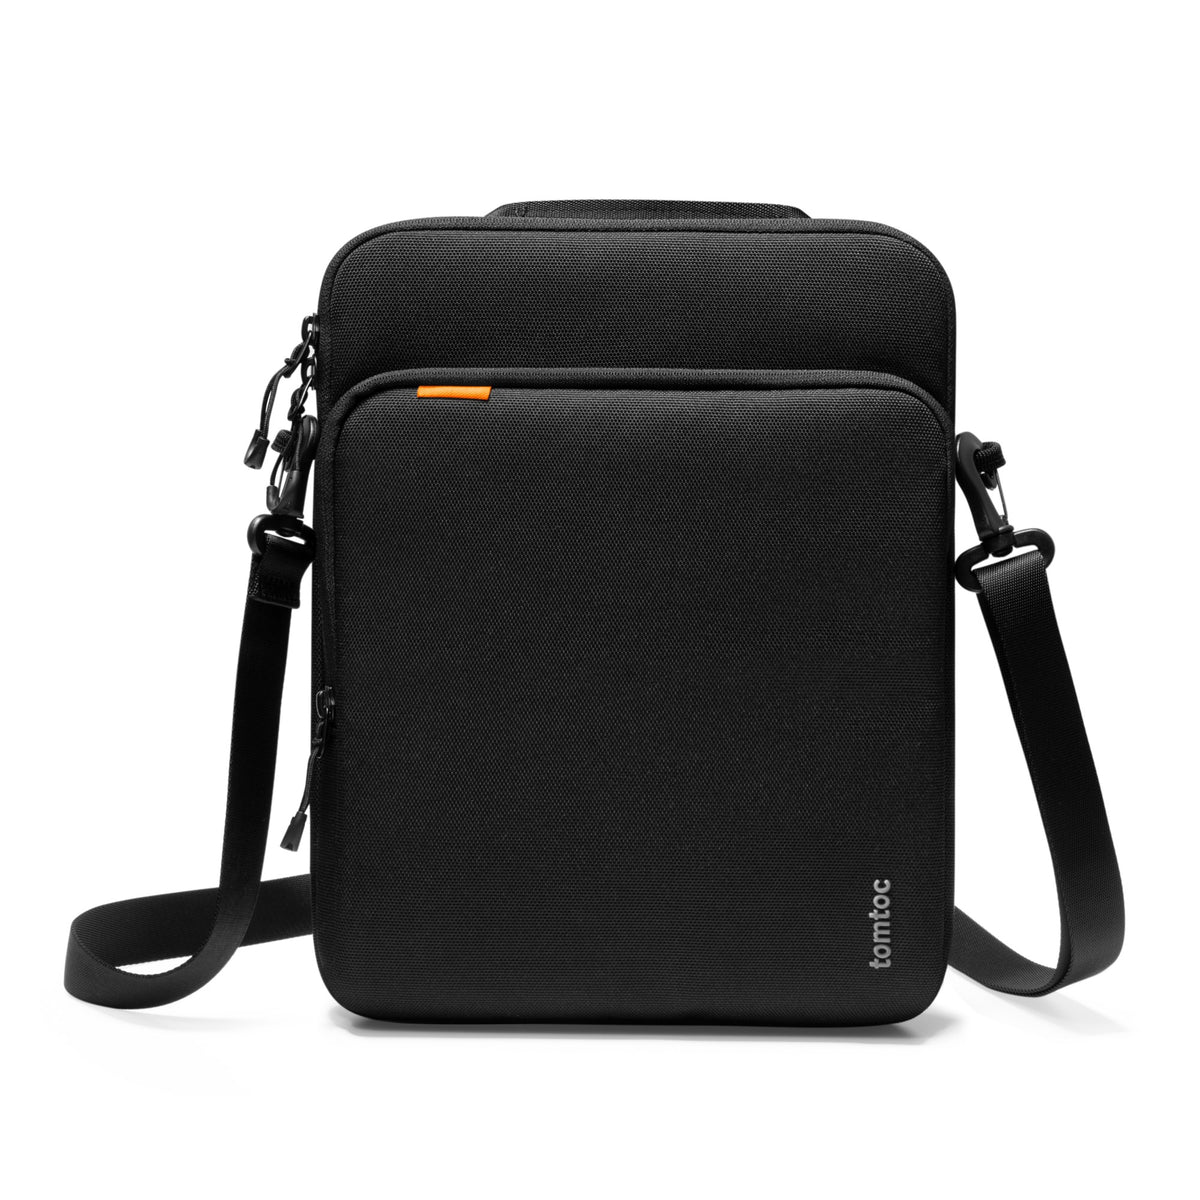 primary_DefenderACE-H13 Tablet Shoulder Bag For 10.9-inch/12.9-inch iPad Air/Pro